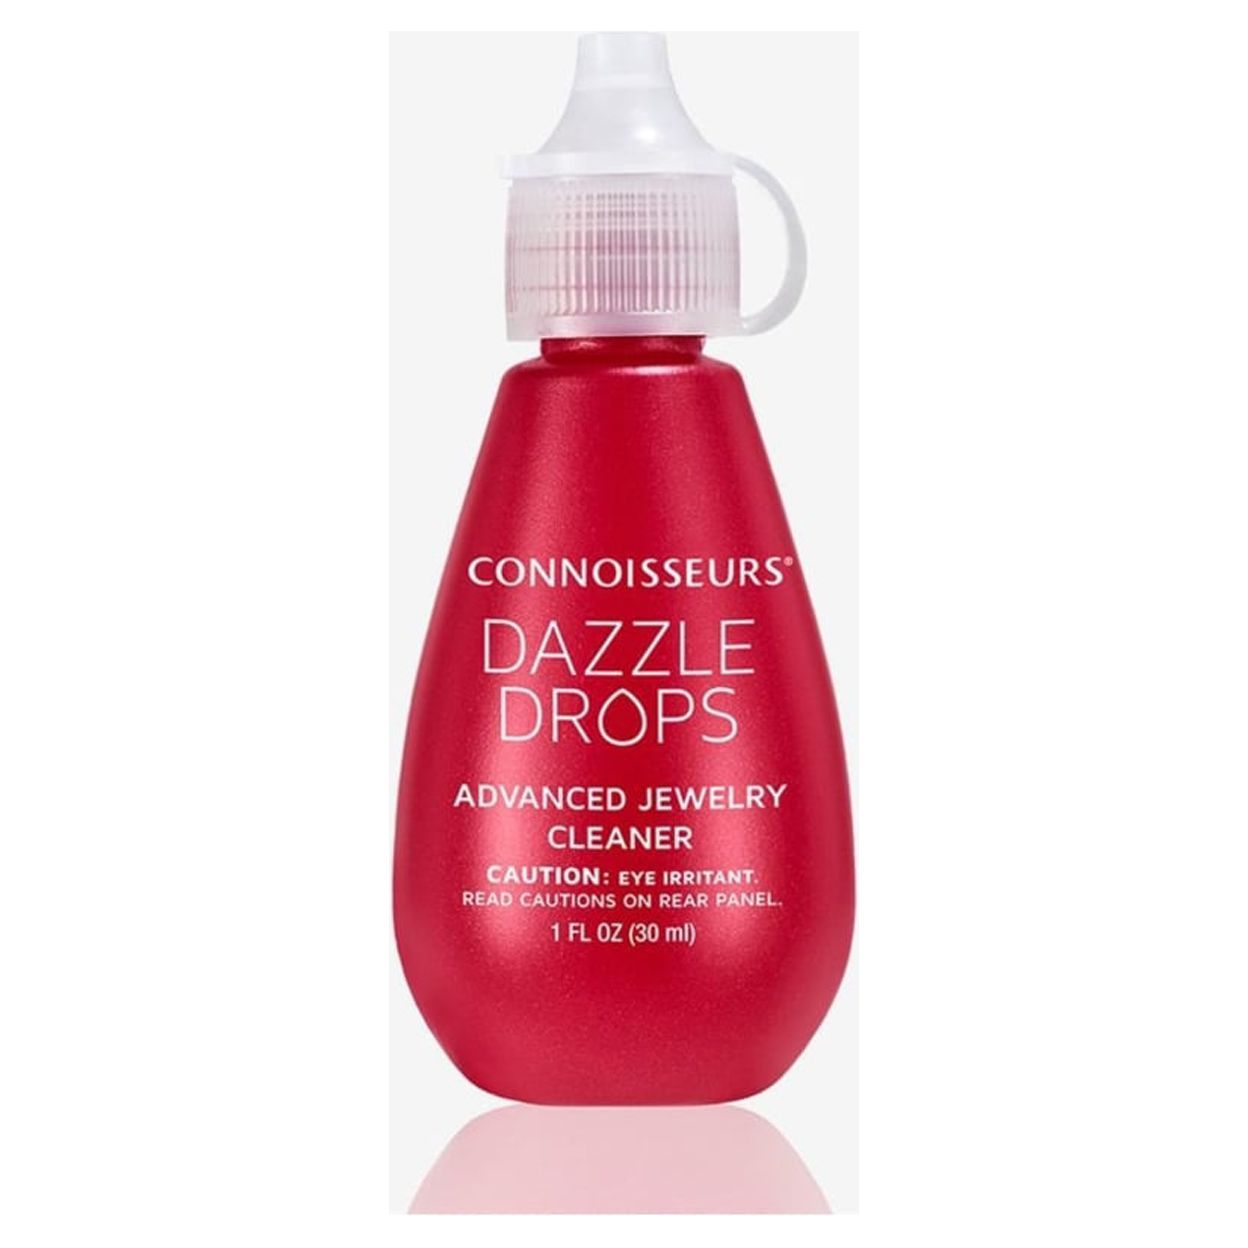 Connoisseurs Dazzle Drops Advanced Jewelry Cleaner, Cleans Gold, Platinum,  Diamonds and all Gemstones Red, 1 fl. oz.